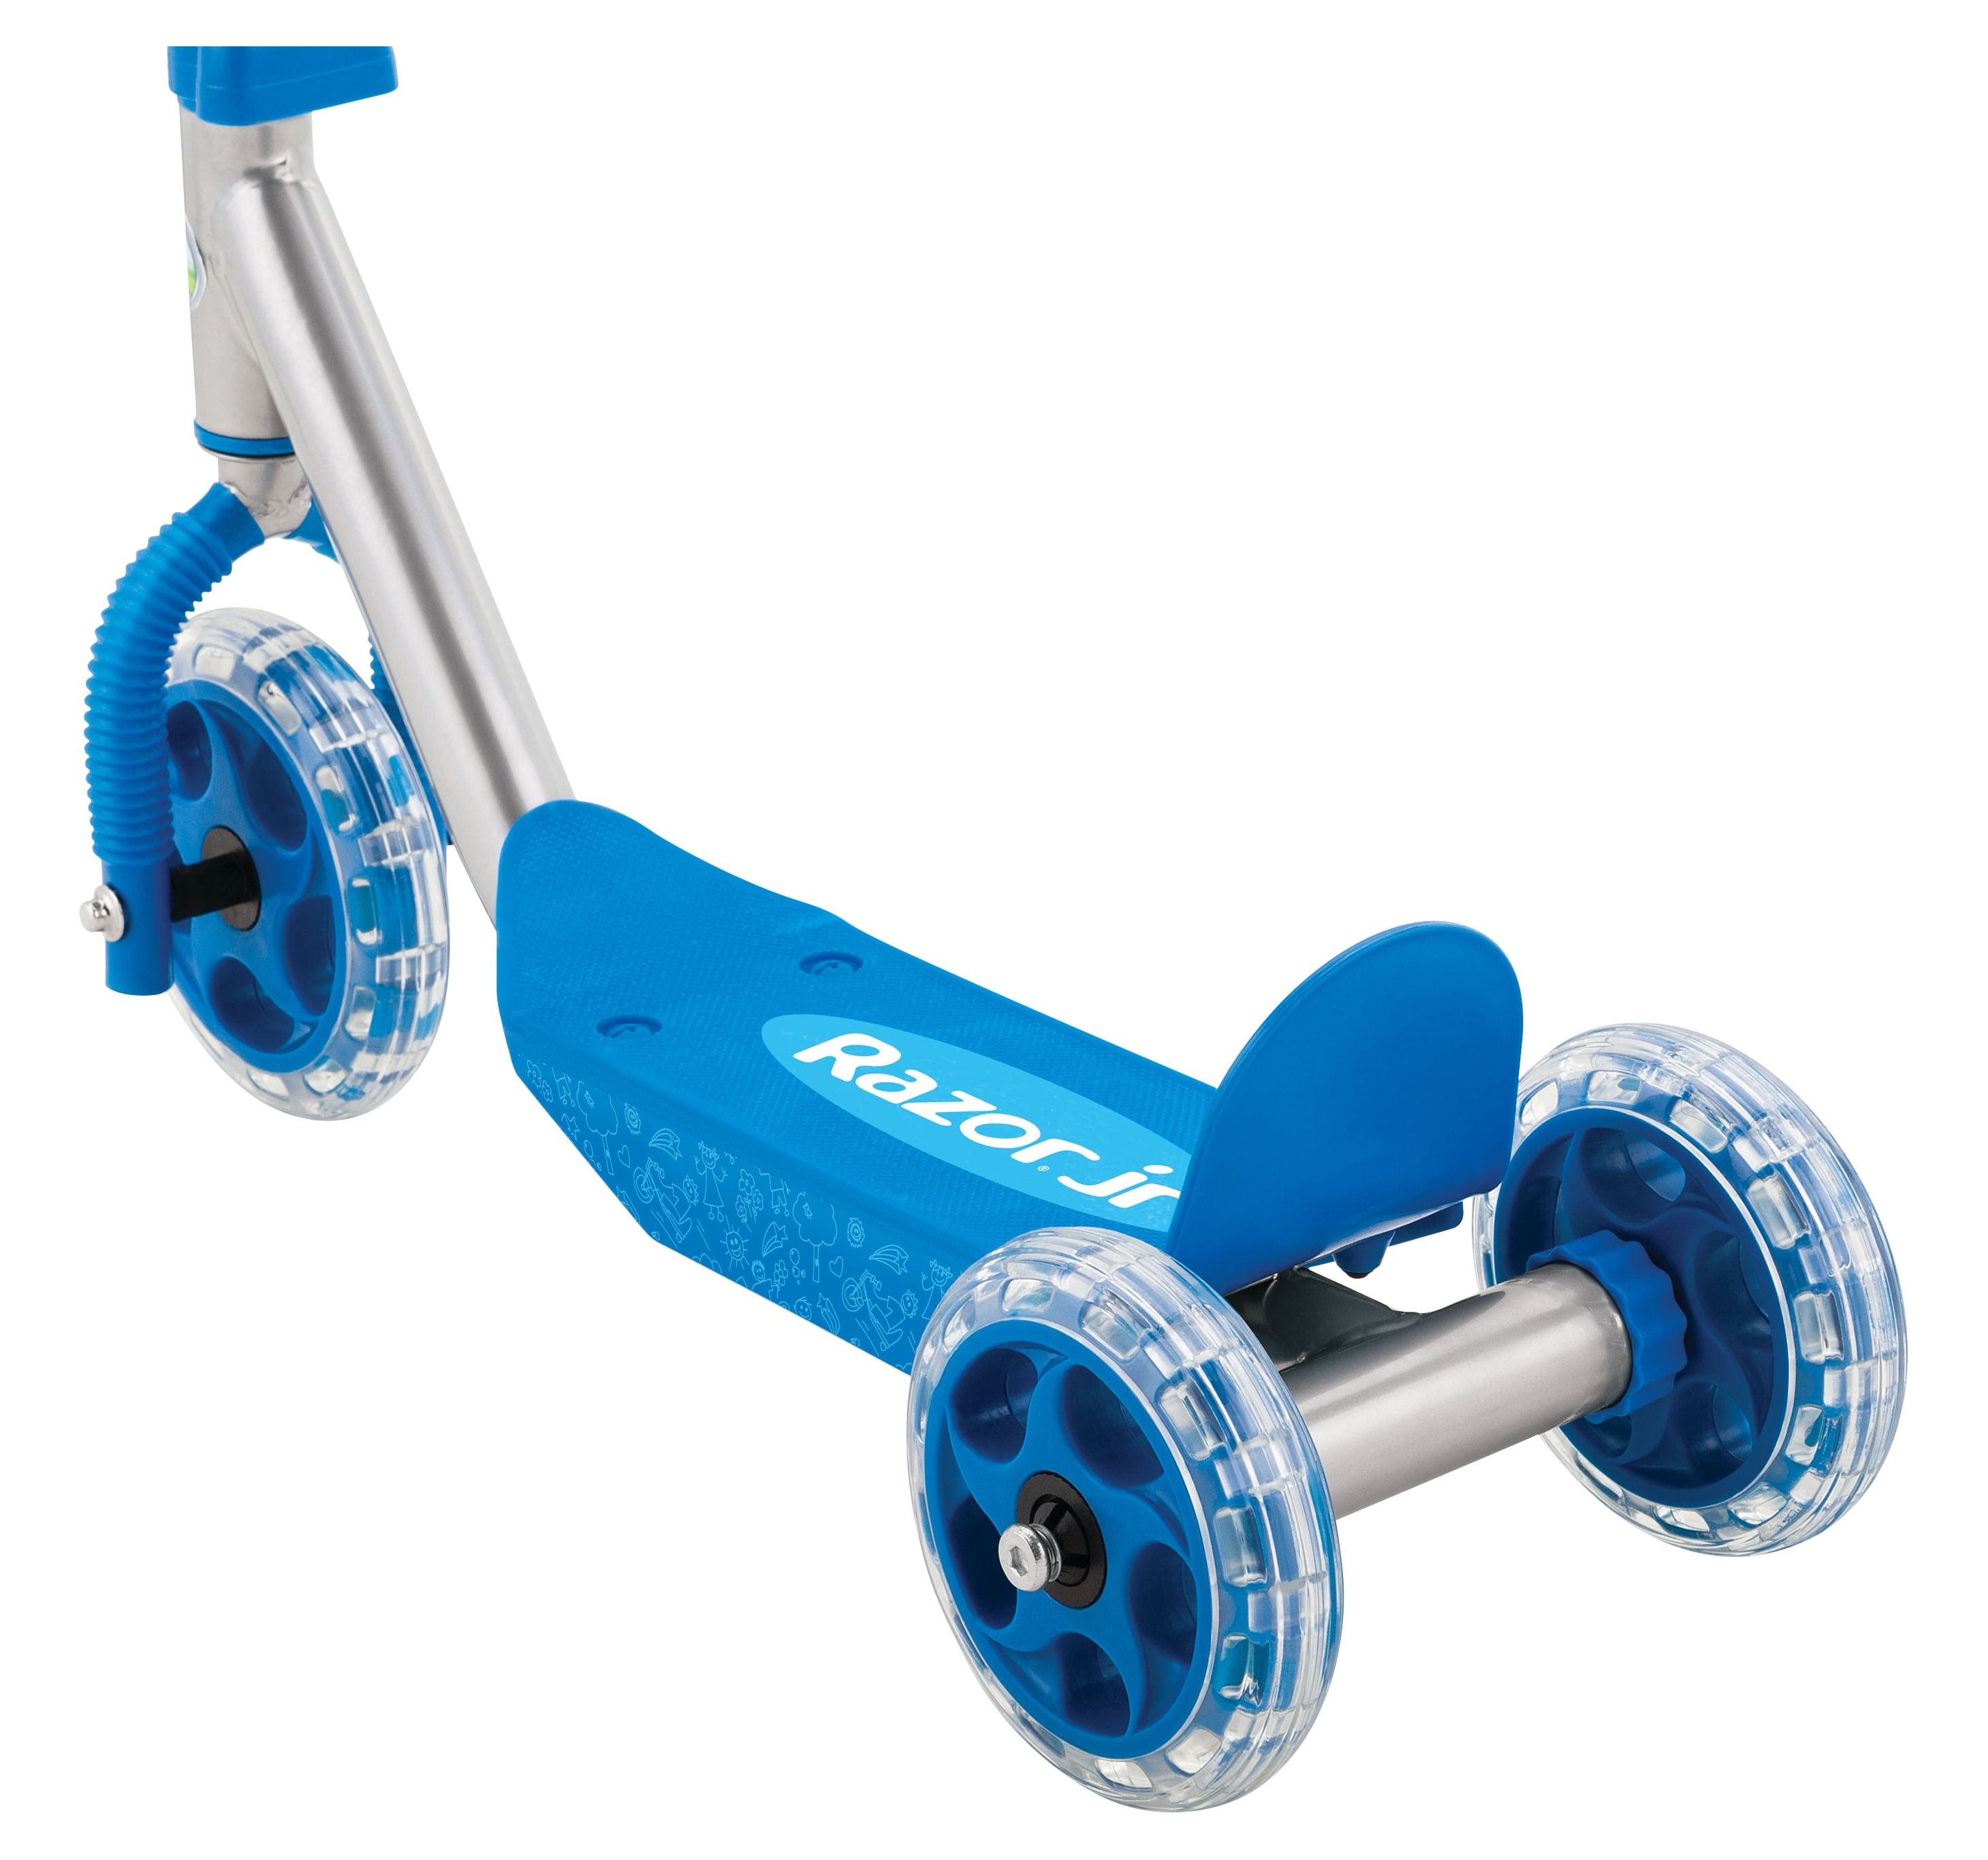 Razor Jr 3-Wheel Lil' Kick Scooter - For Ages 3 and up, Blue - image 4 of 9